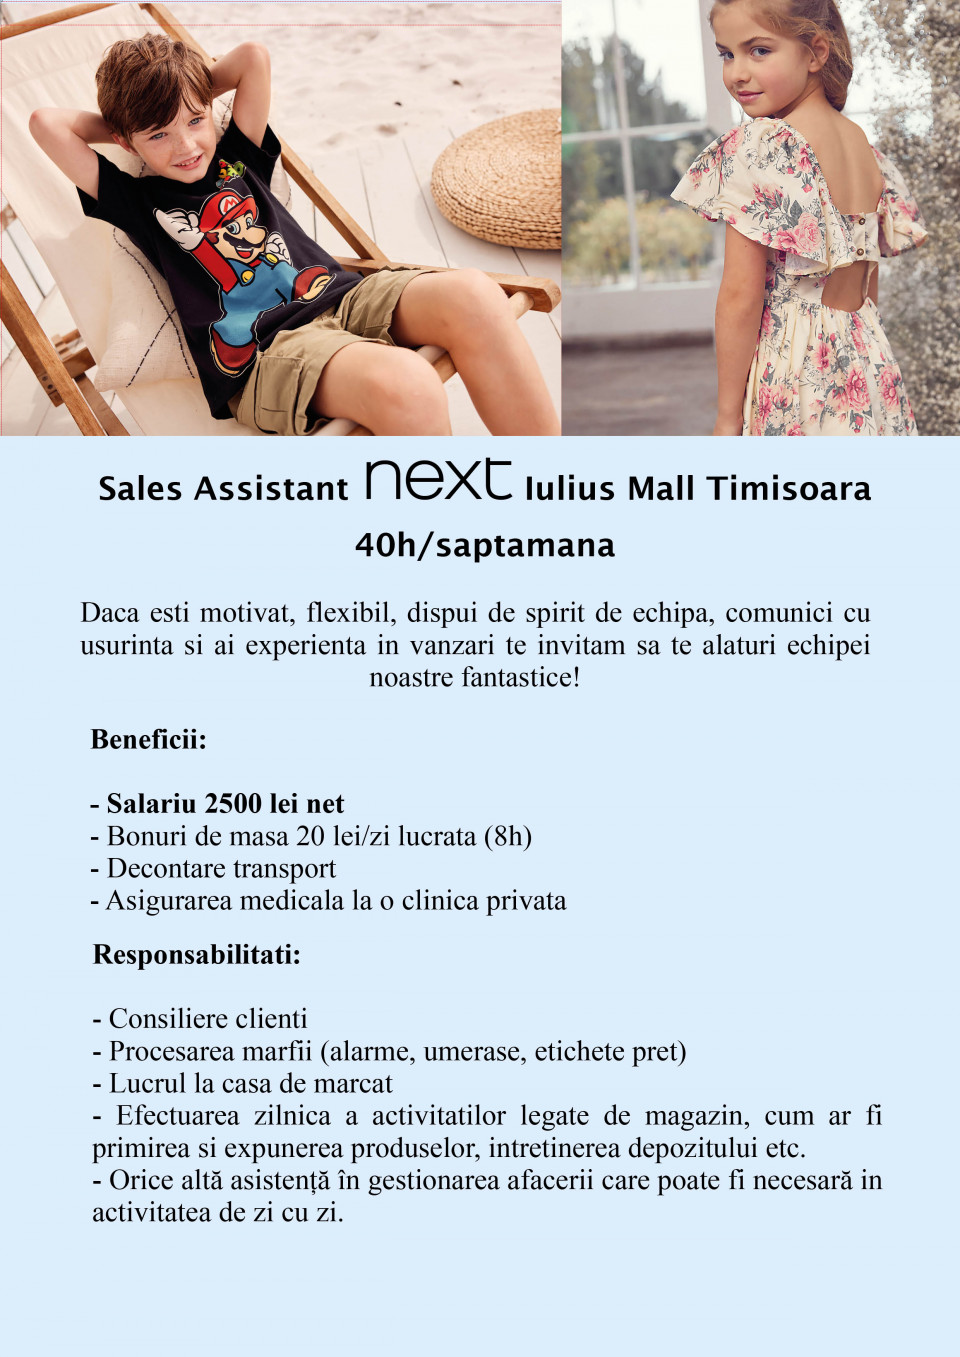 Sales Assistant Next Iulius Mall (full time/part time)